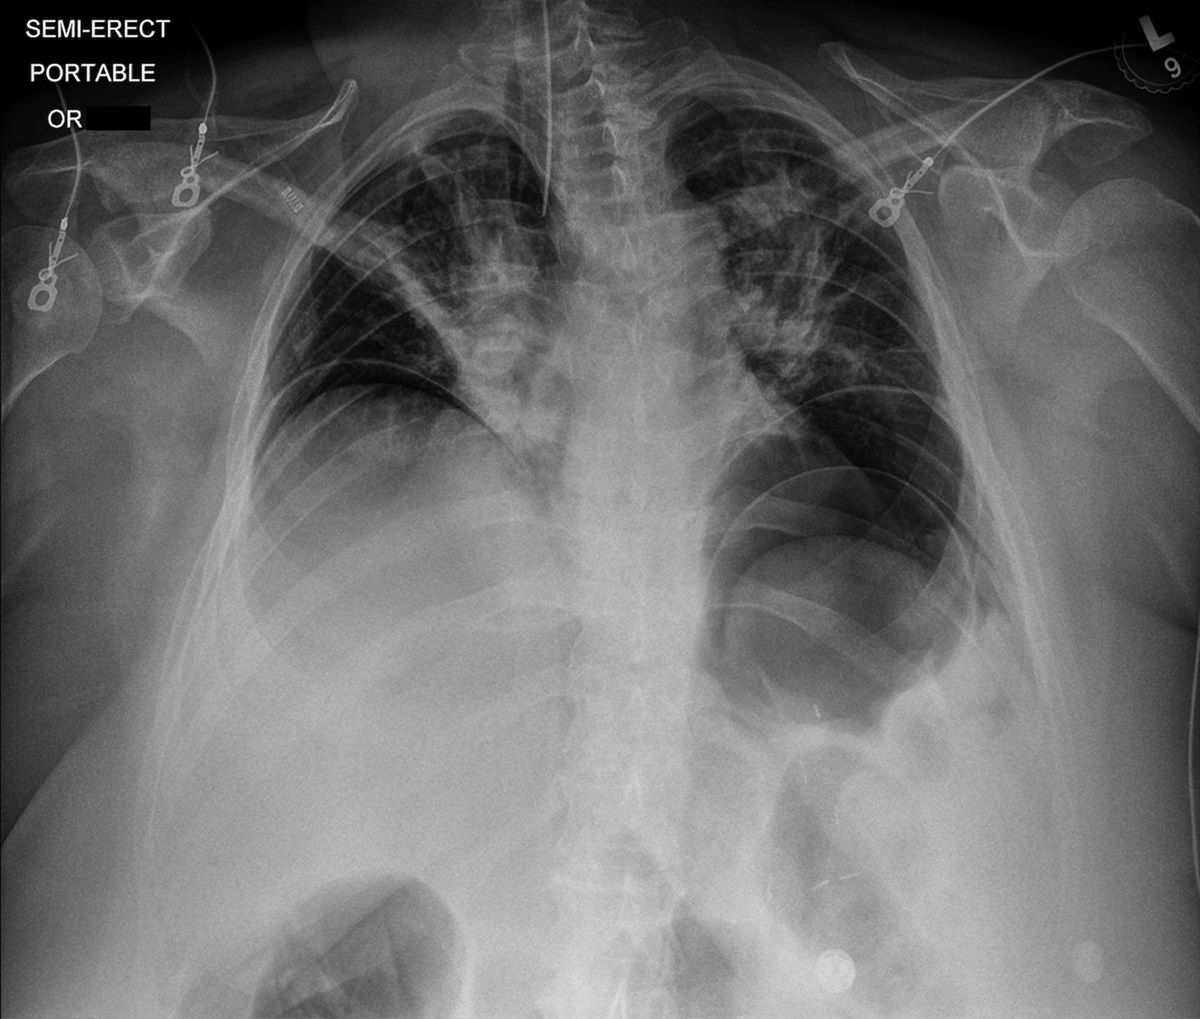 Acute Respiratory Failure Complicating Endoscopic Sleeve Gastroplasty: A Case Report